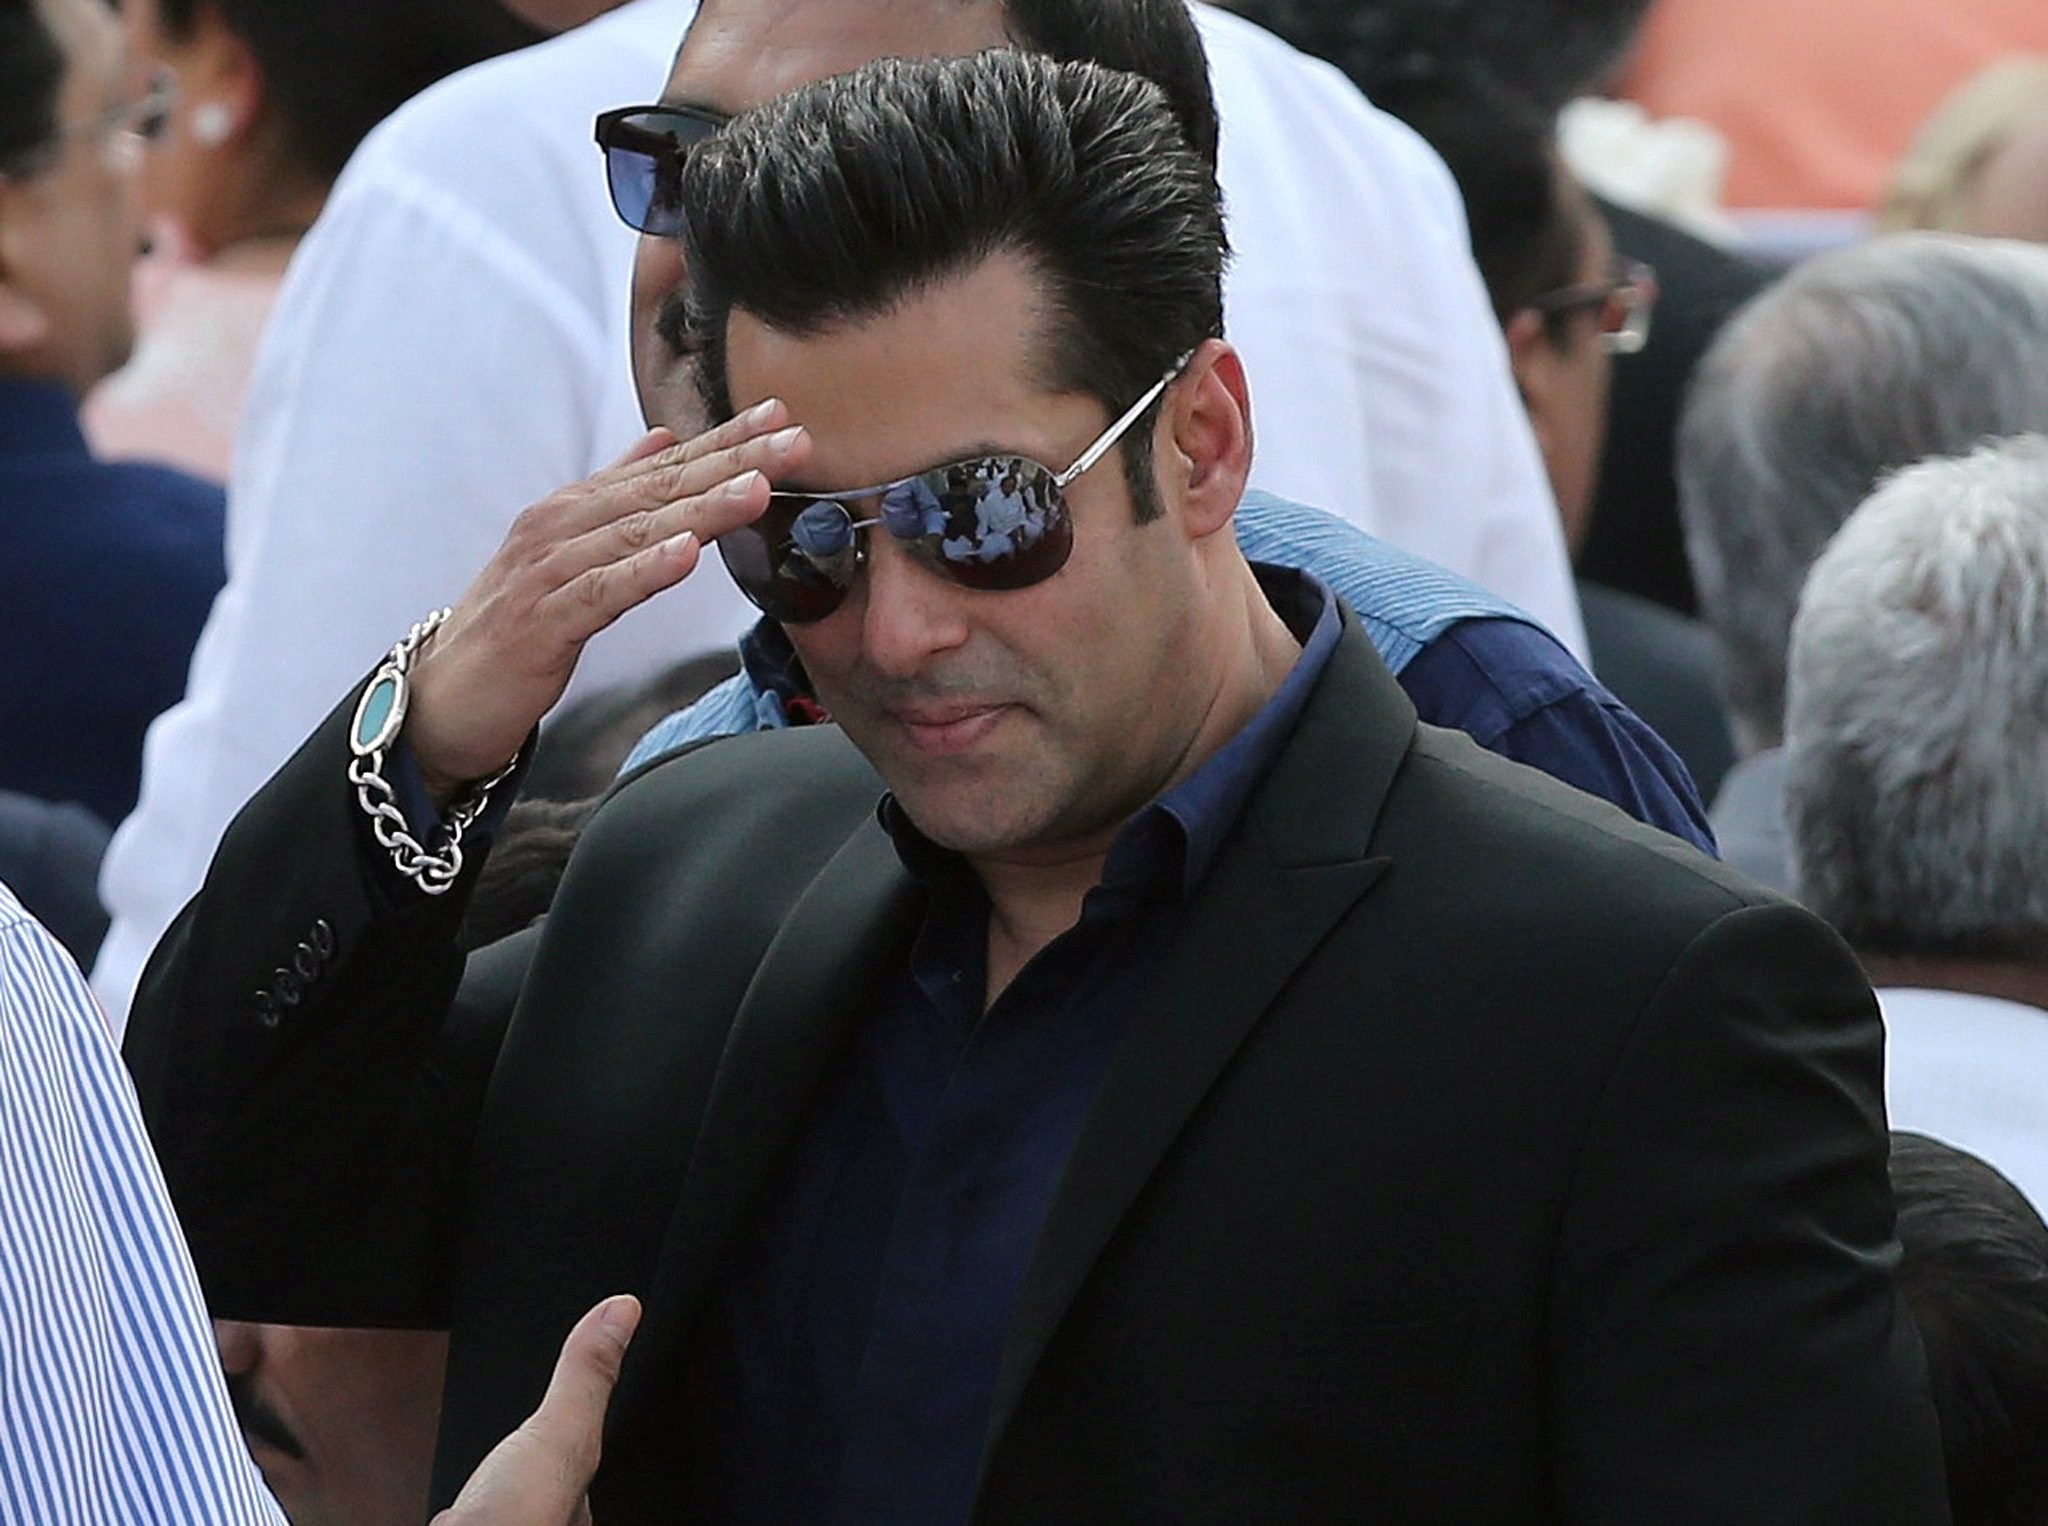 Salman Khan Wallpapers Images Photos Pictures Backgrounds